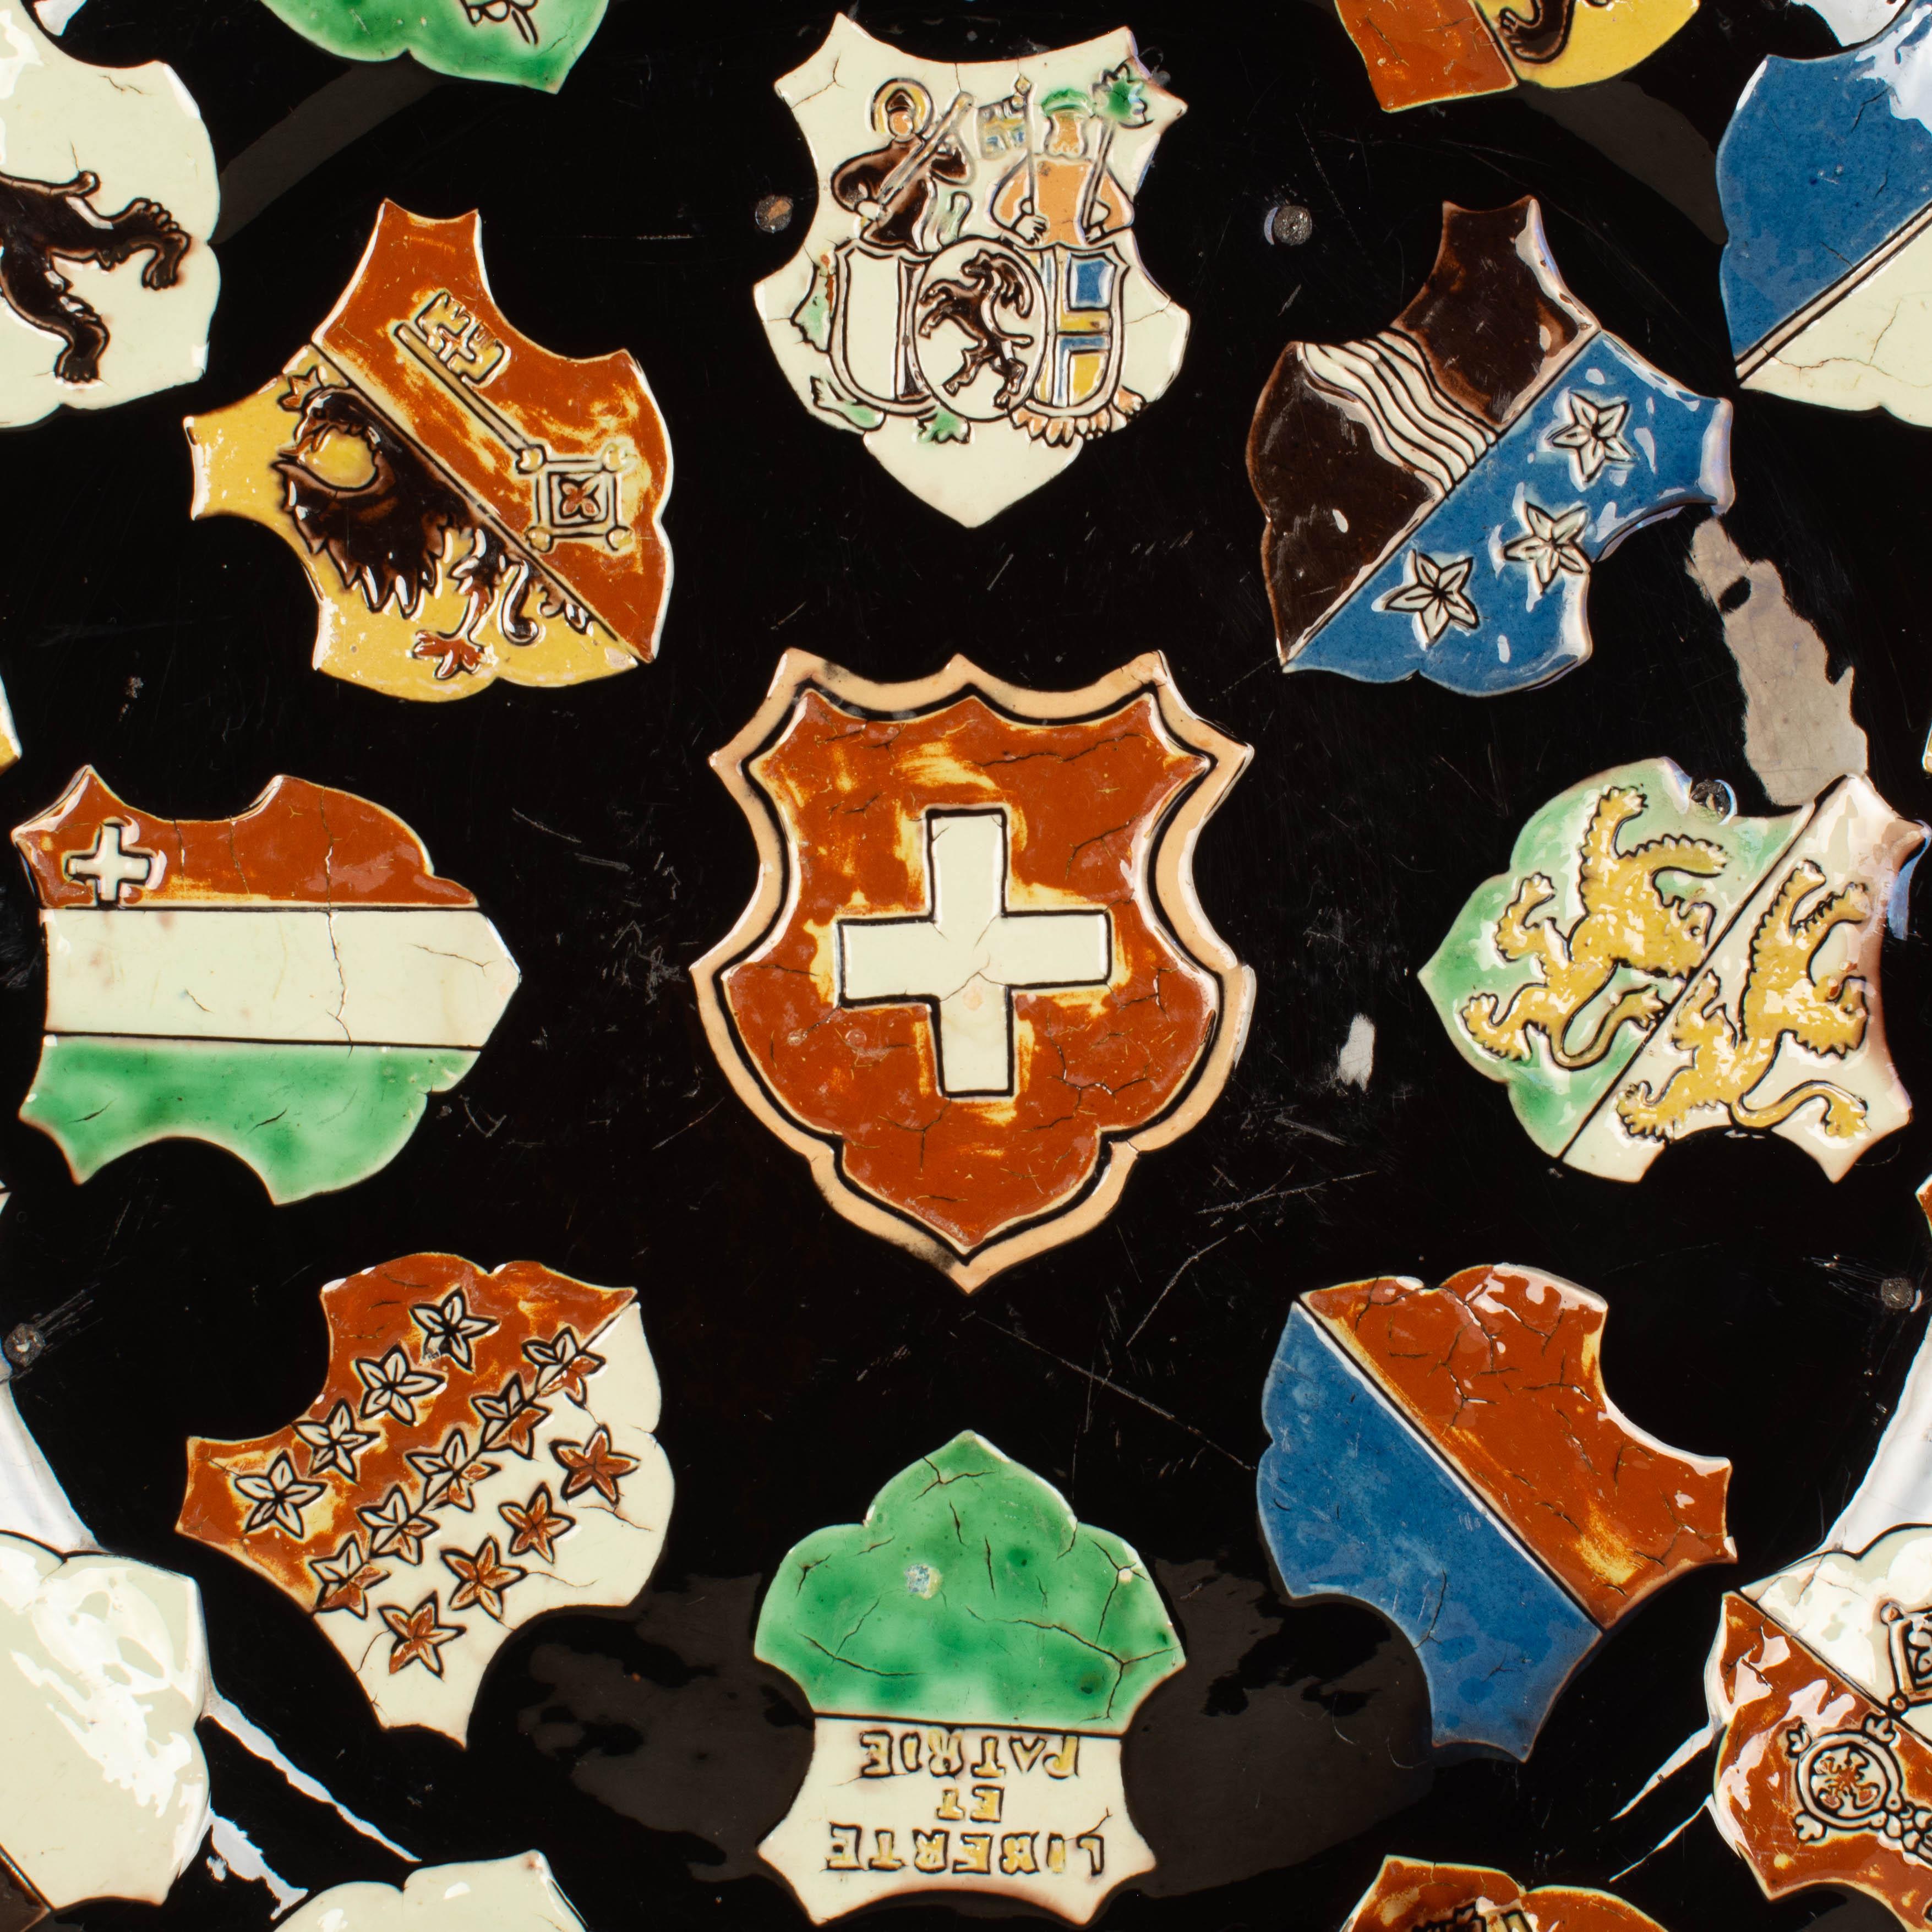 A 19th century Swiss glazed ceramic decorative platter or charger, hand-painted with images of coat of arms or crests of the Swiss provinces. Holes pierced on the back with wire for hanging on the wall. Small chip on back and minor losses to glaze.